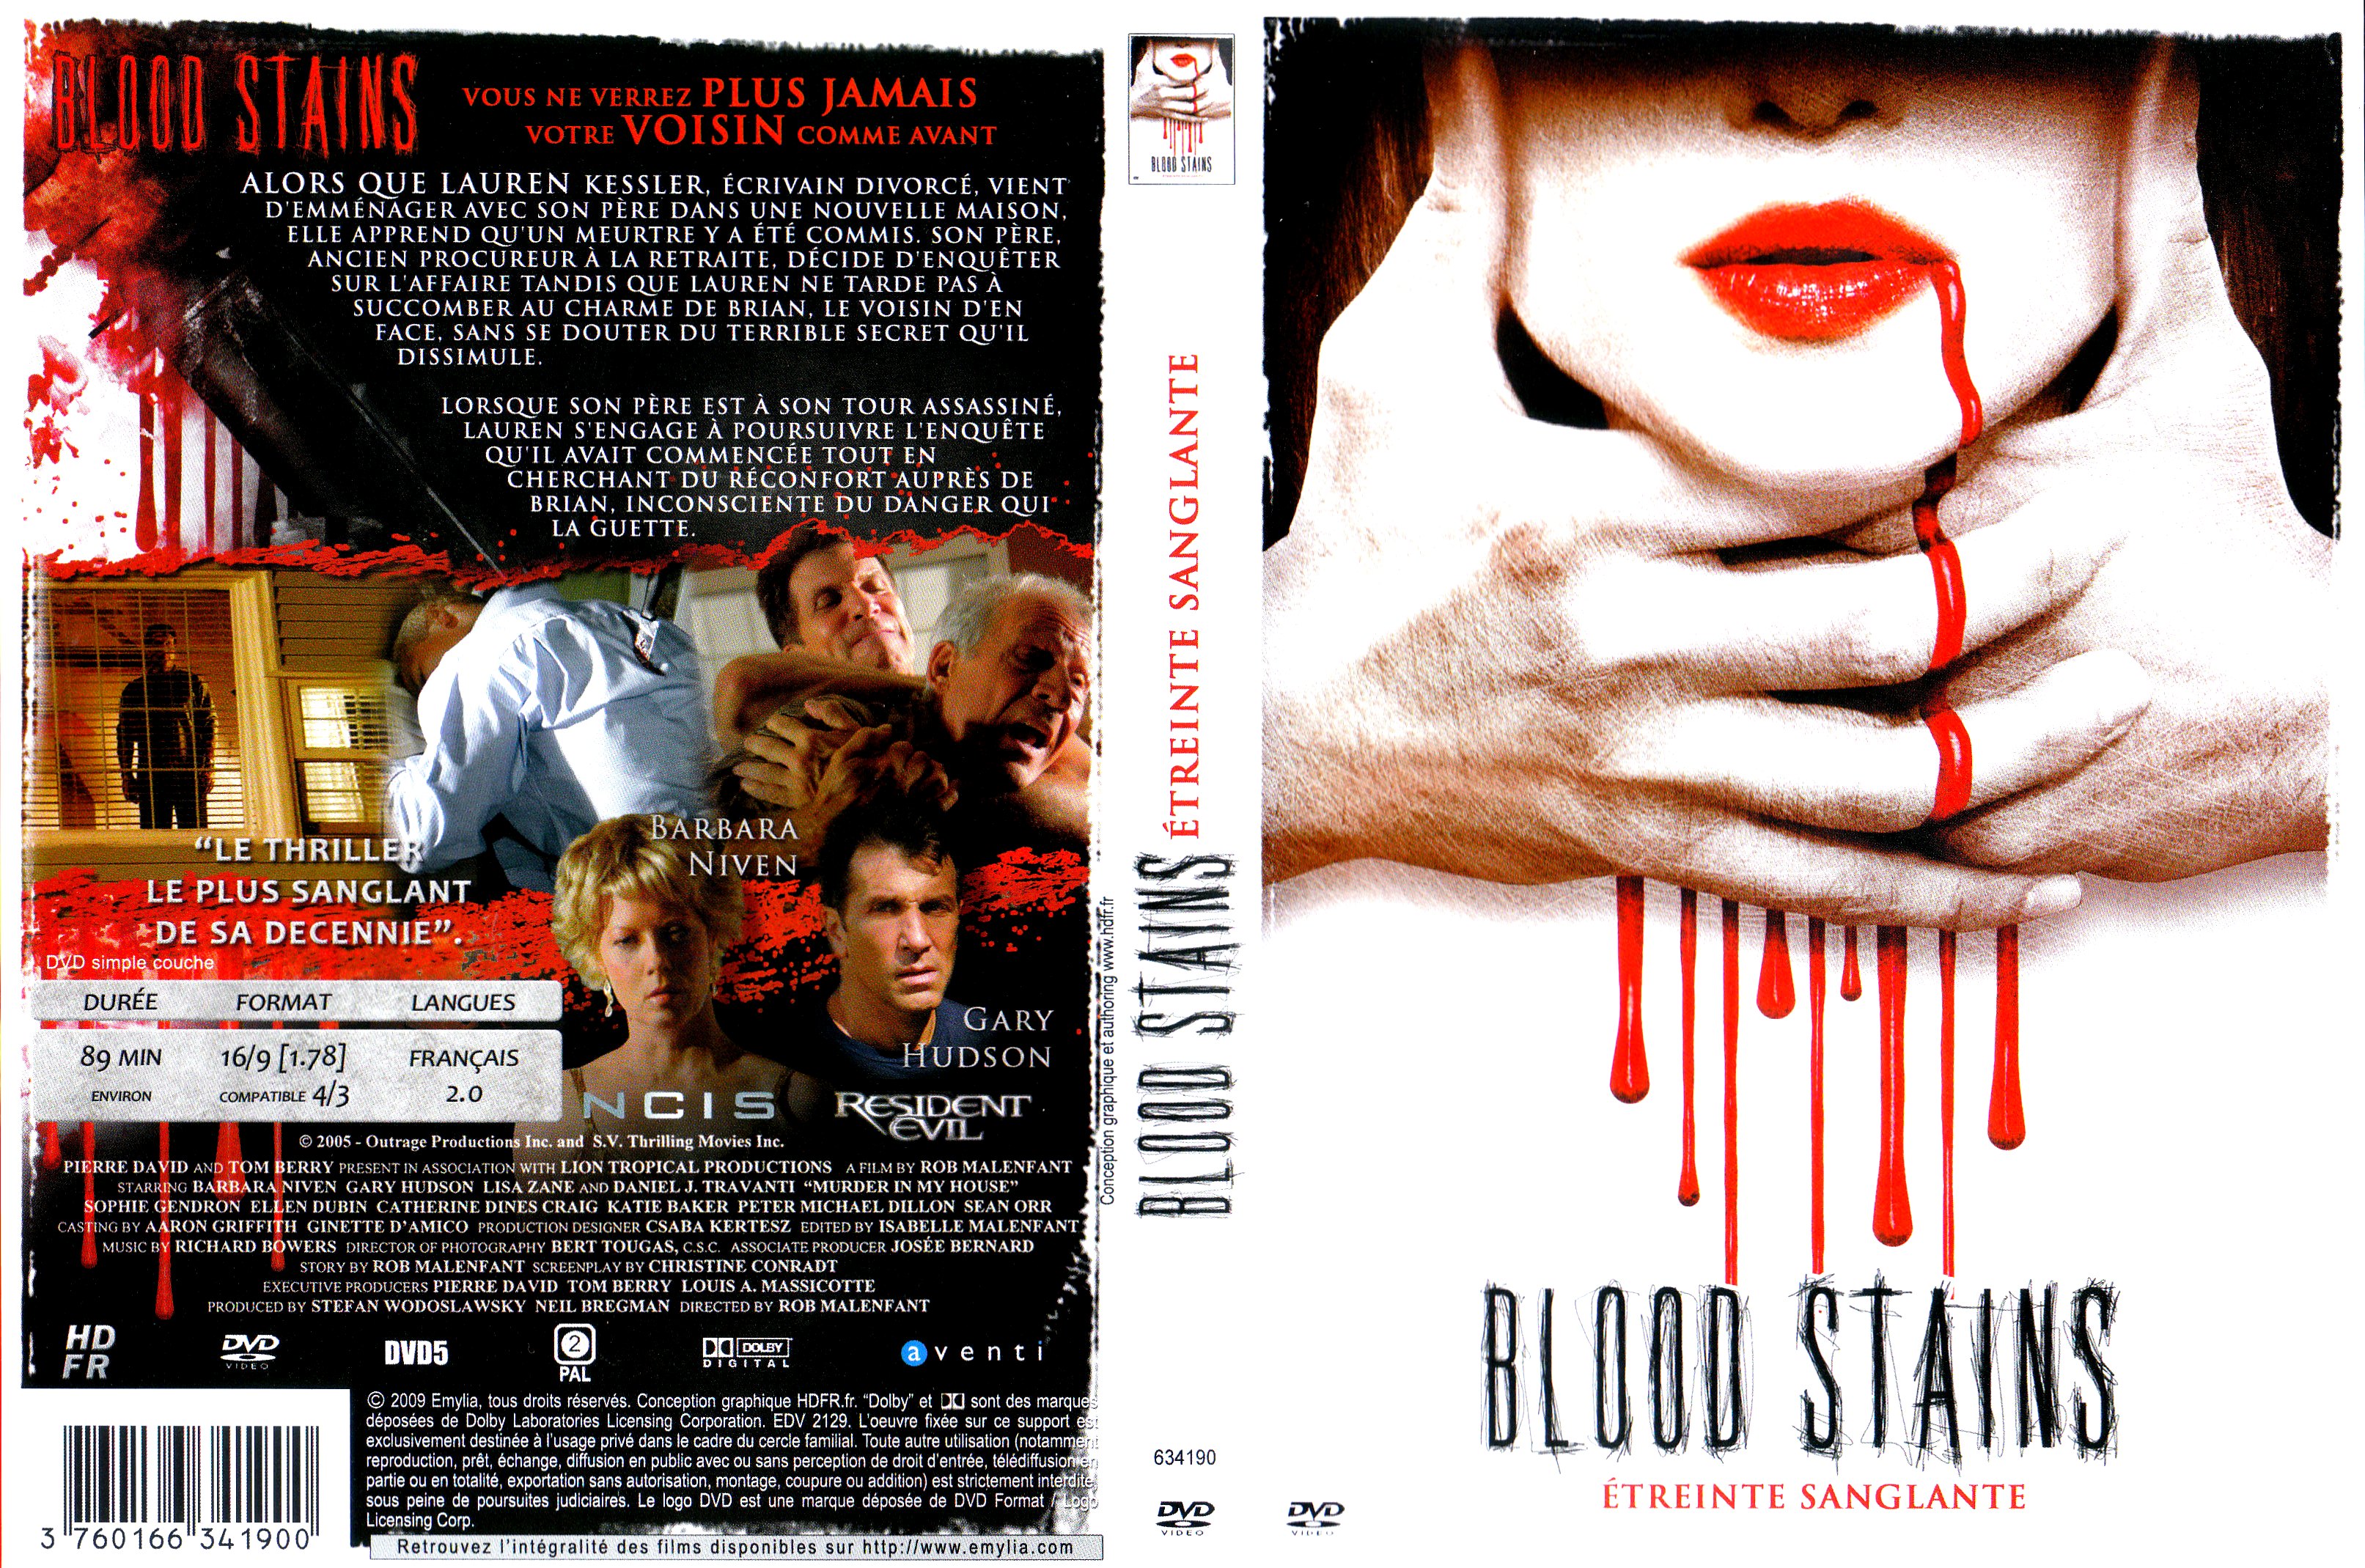 Jaquette DVD Blood stains